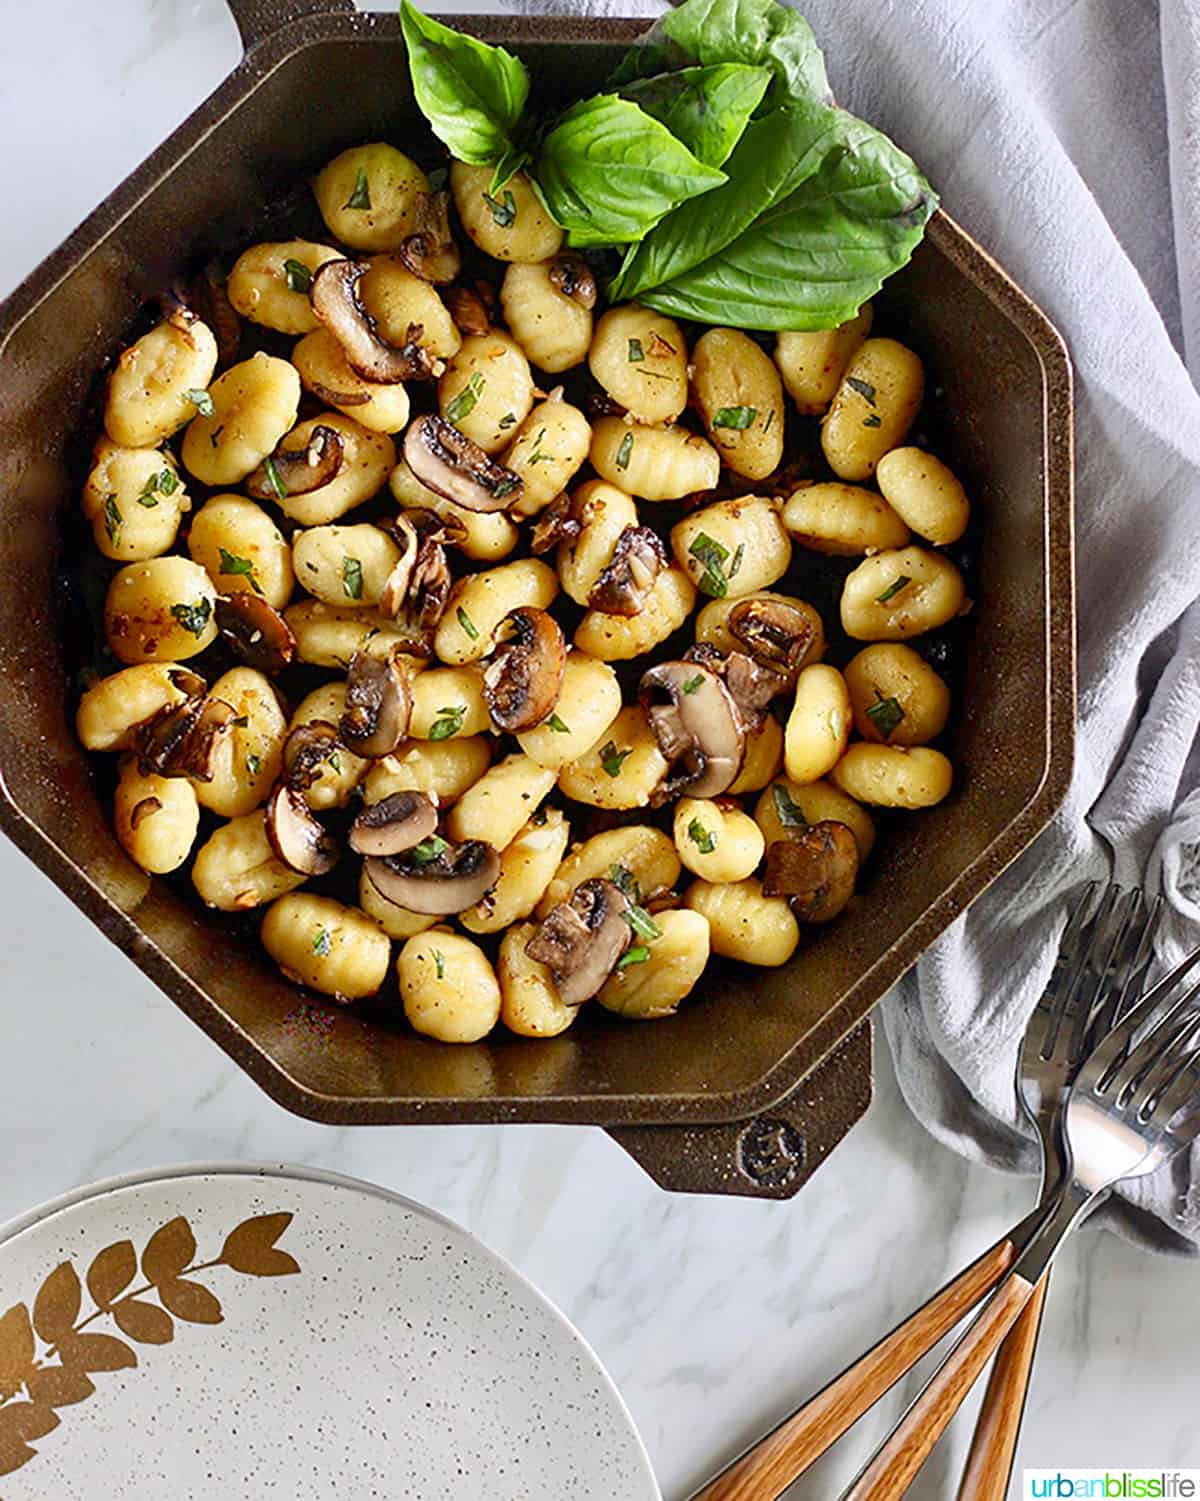 cast iron skillet with gnocchi, mushrooms, basil, plates and forks.